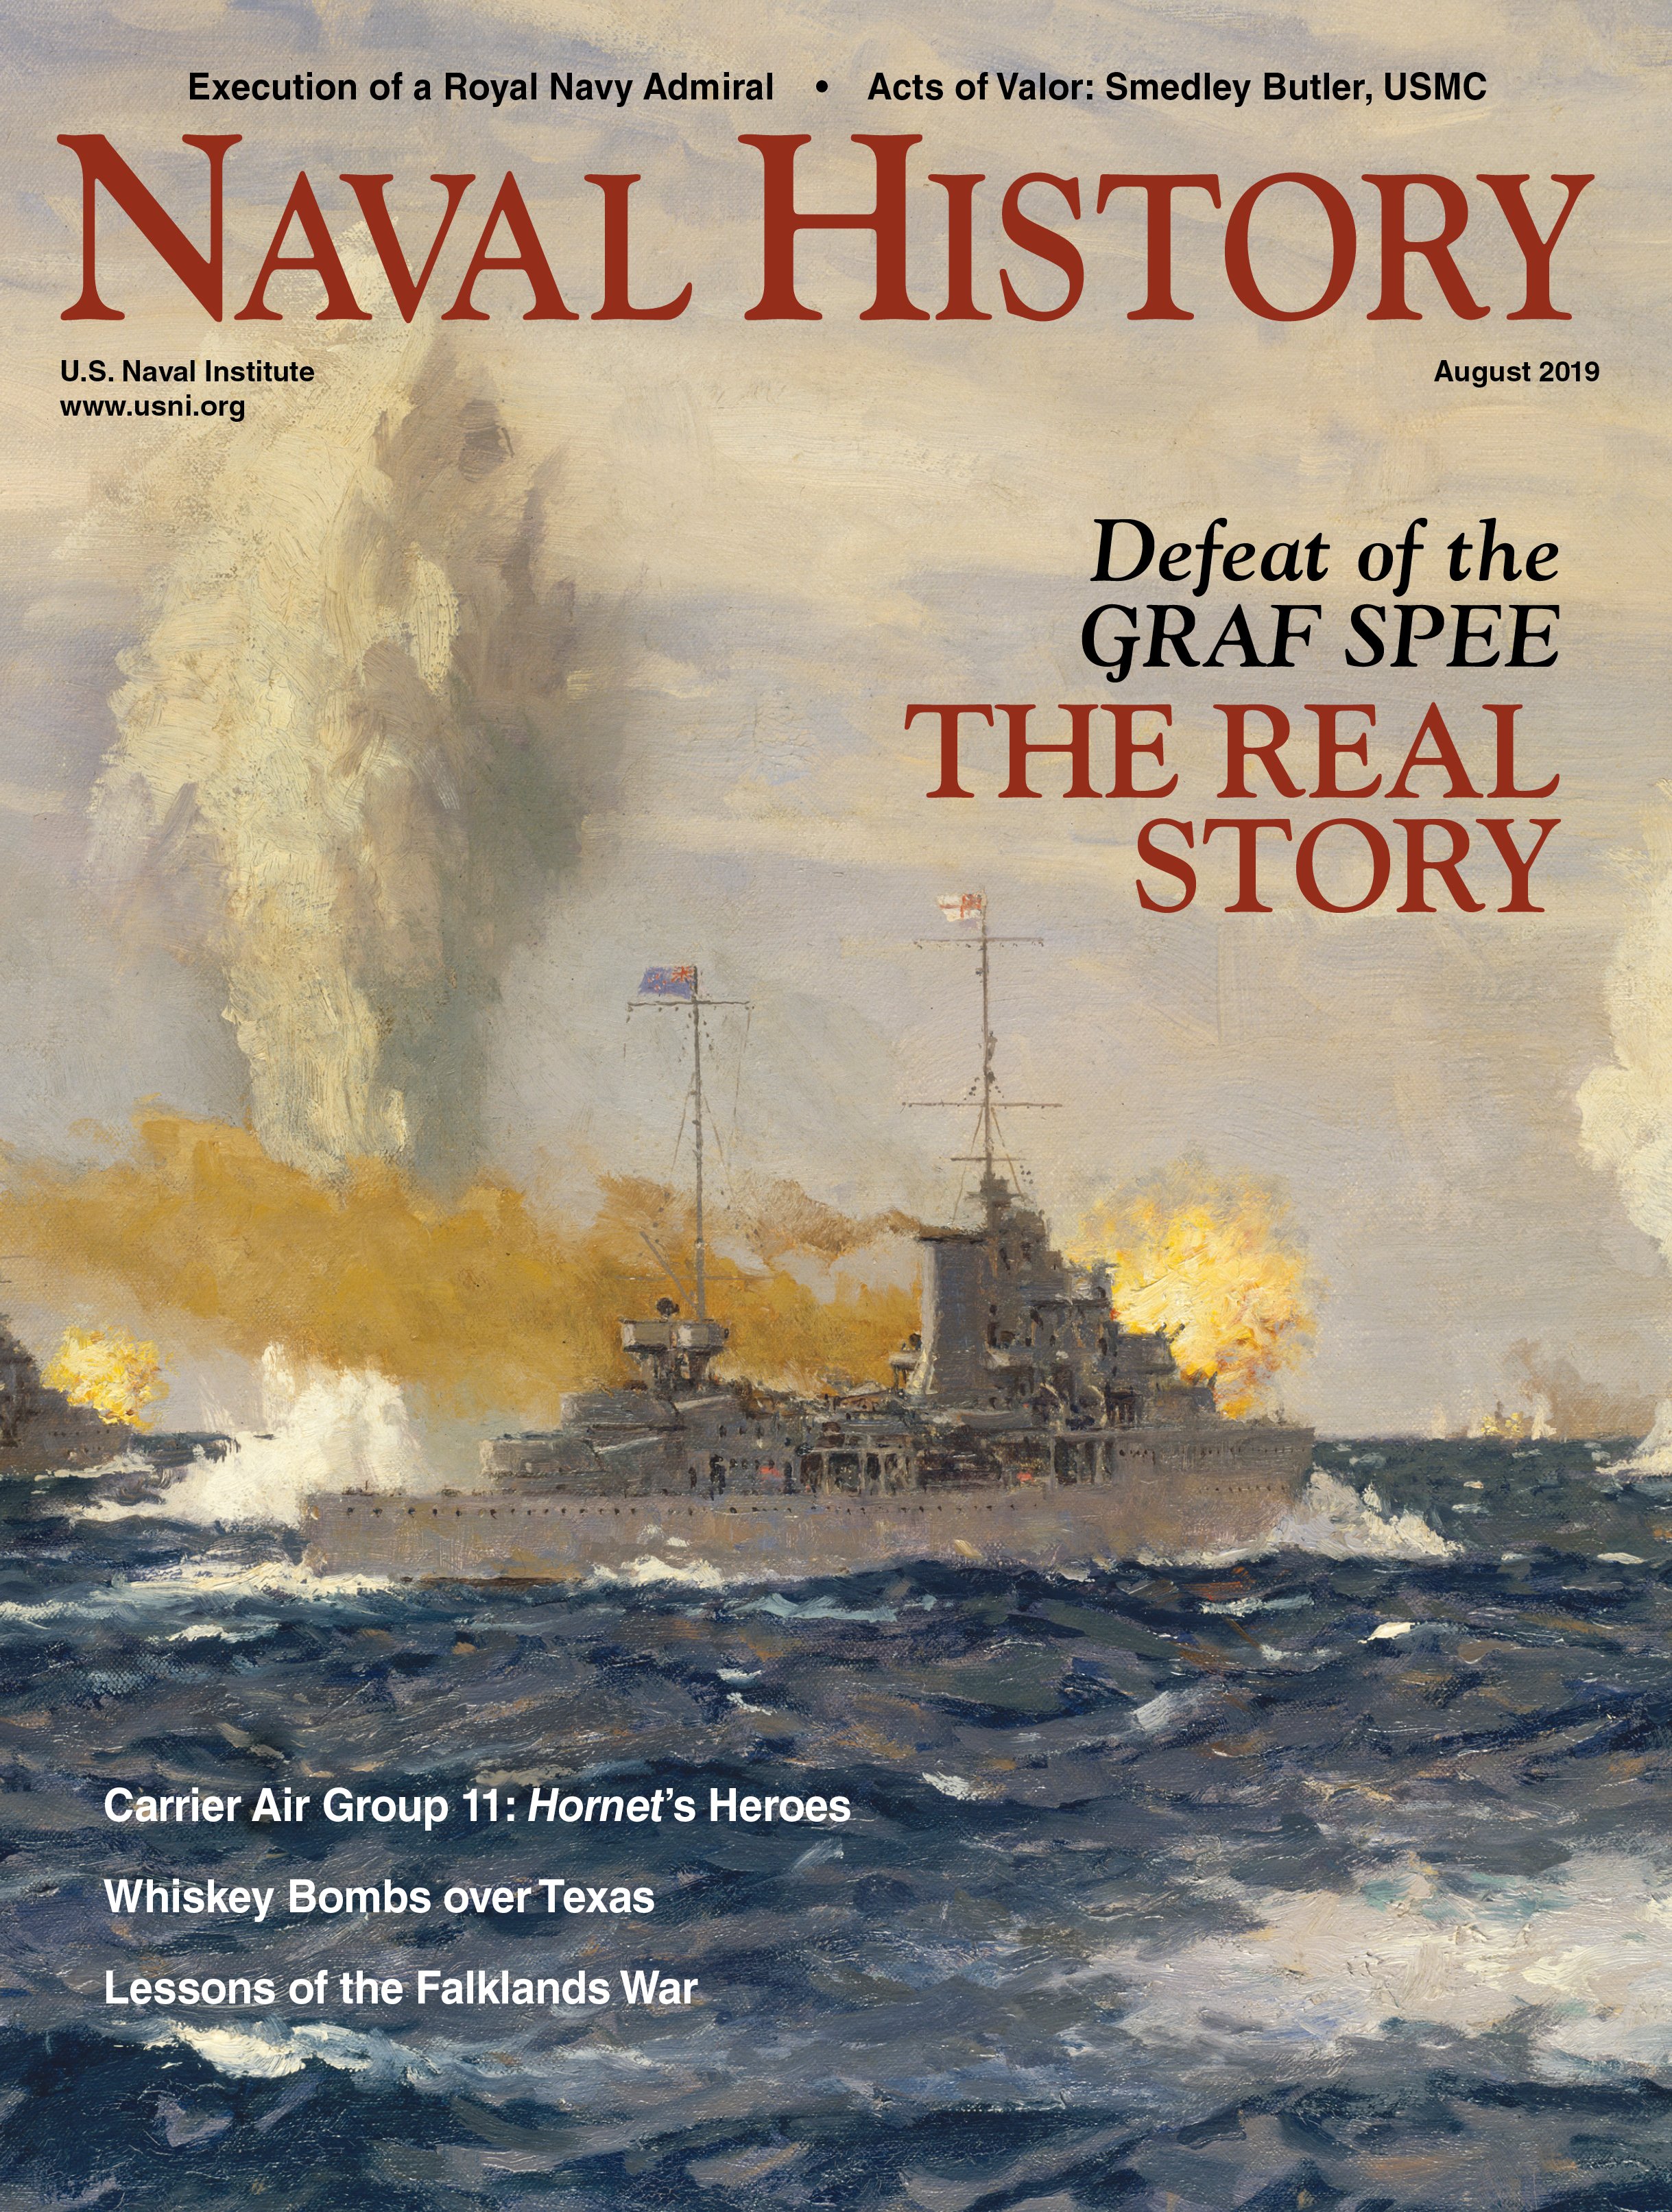 Naval History Magazine - August 2019, Volume 33, Number 4 Cover